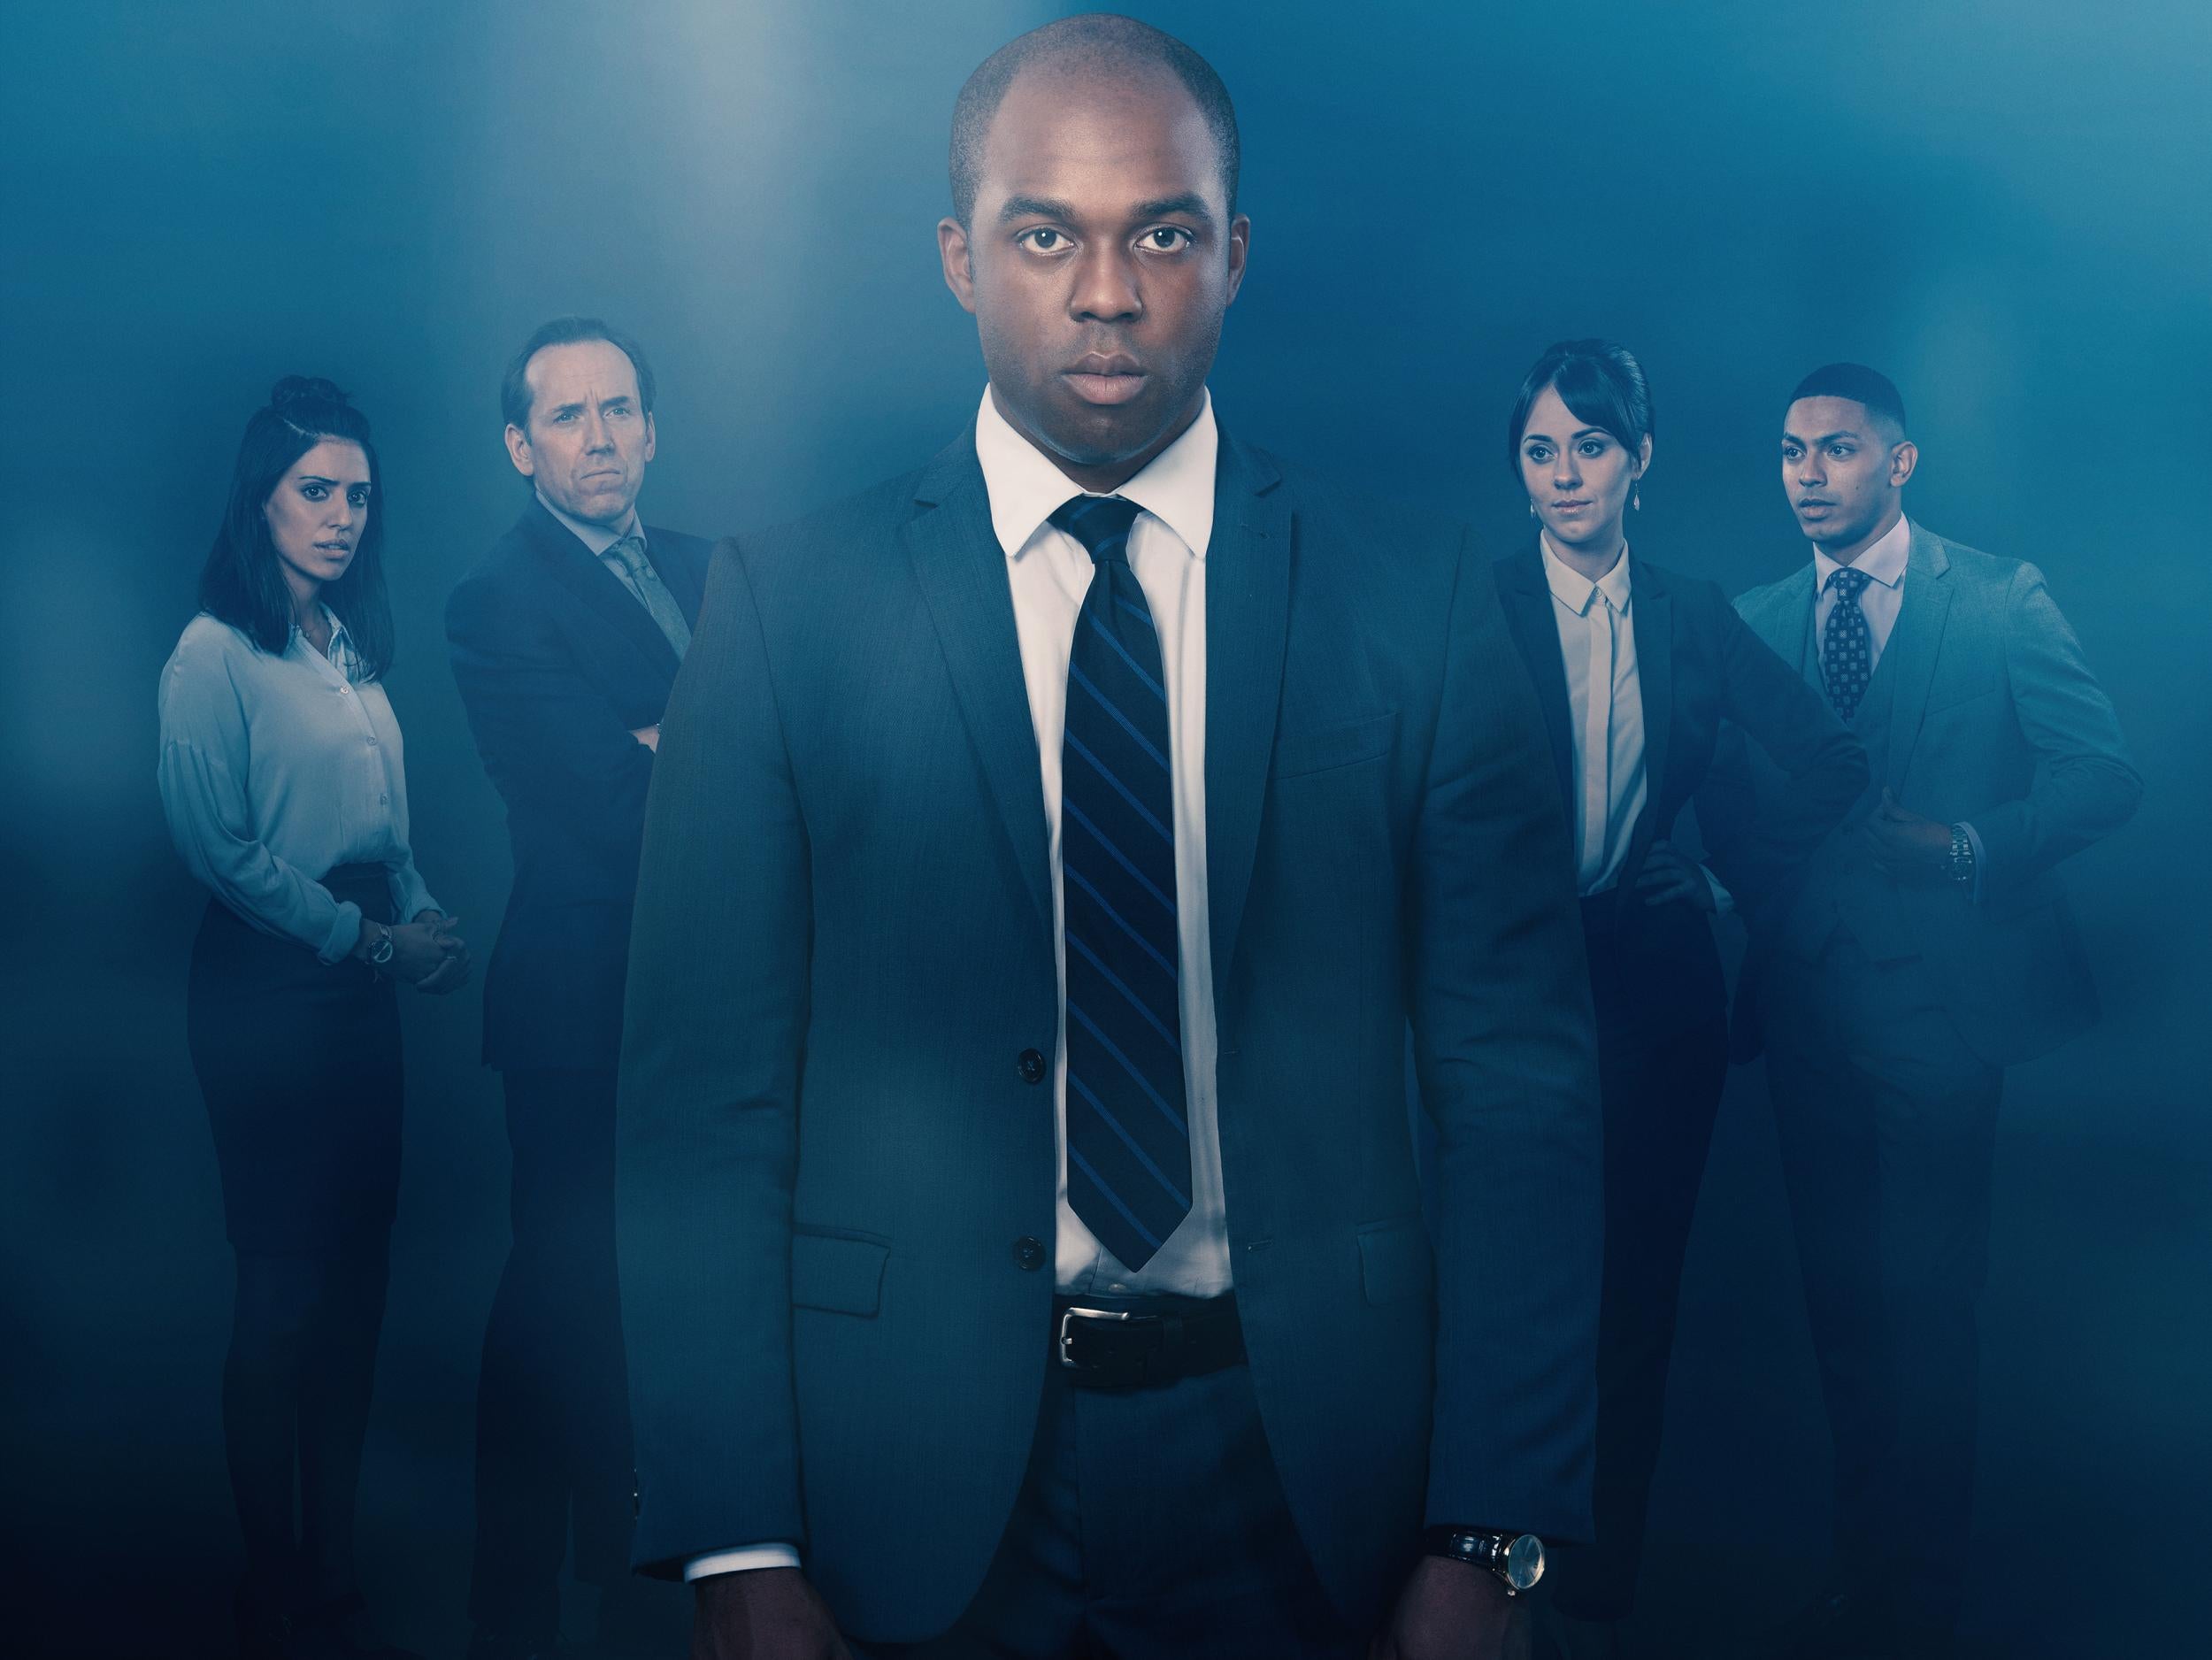 Ken Nwosu stars as hardworking businessman Thomas Benson in Bartlett’s new three-part thriller ‘Sticks and Stones’ on ITV about bullying in the workplace